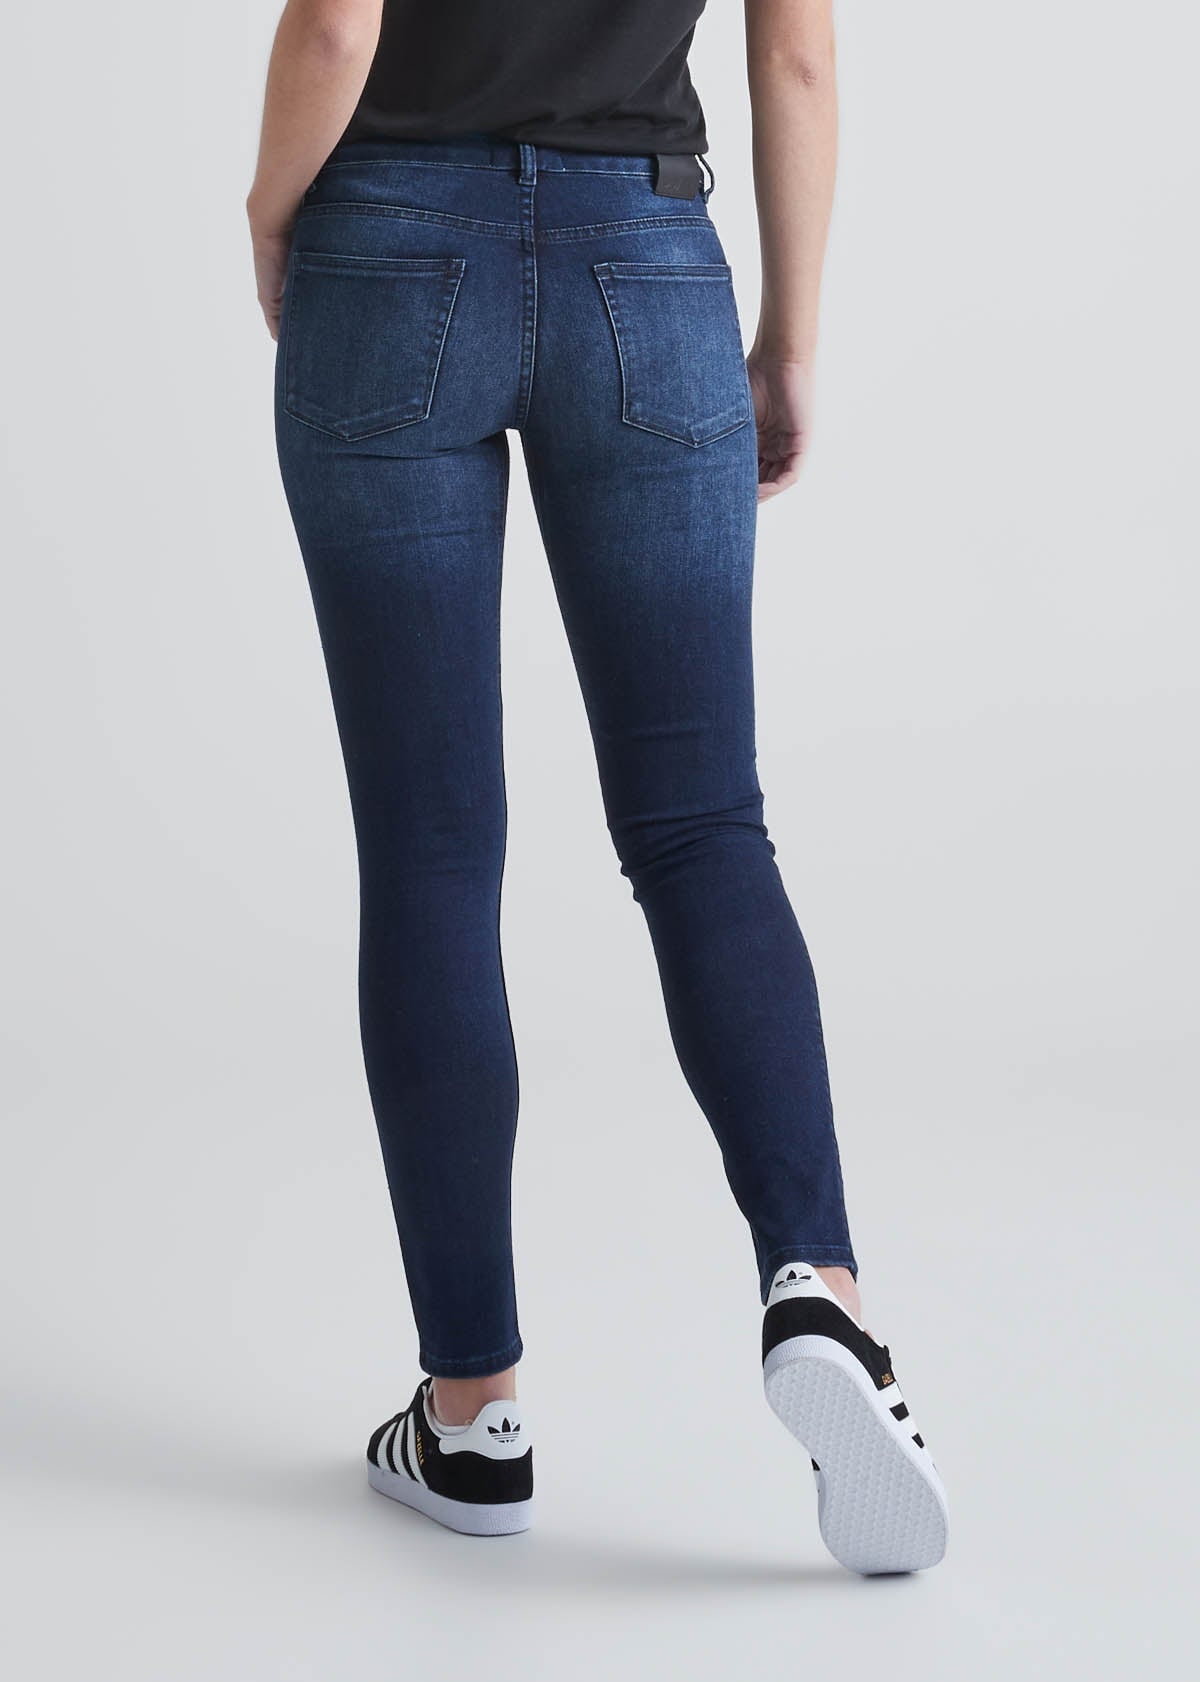 Women's High Rise Skinny Fit Stretch Jeans